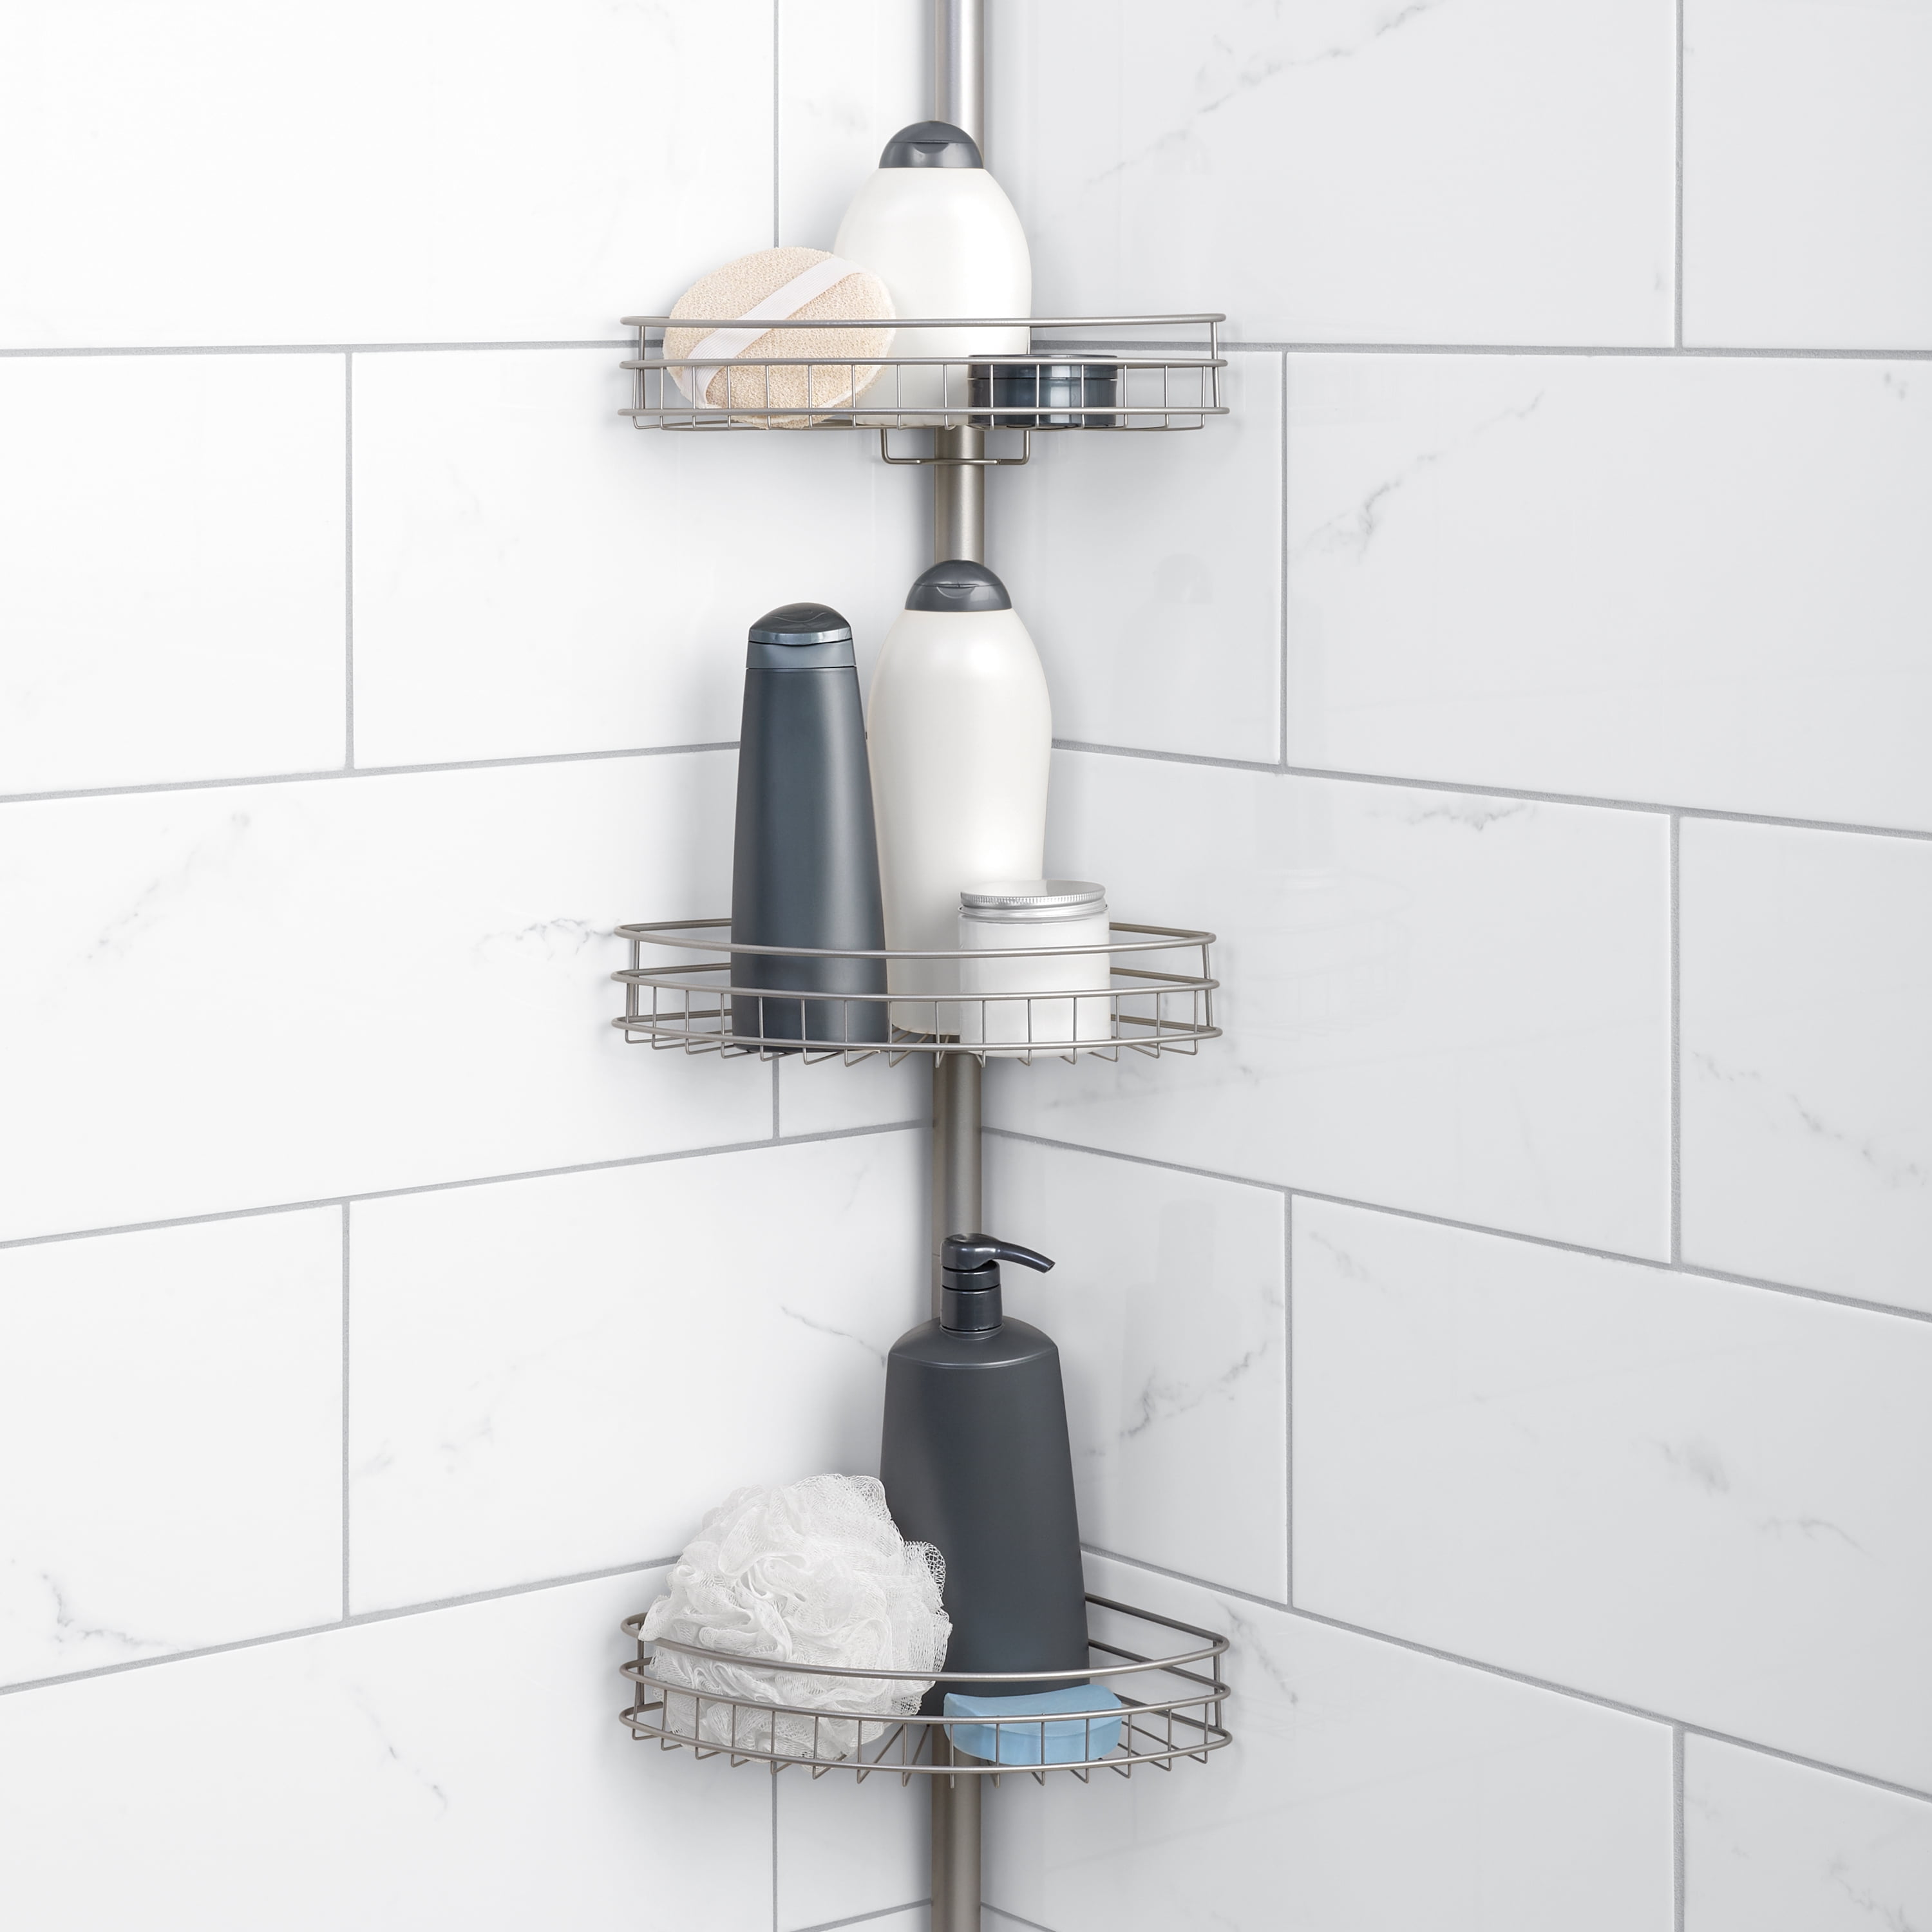 Mainstays Adjustable Tension Shower Pole Caddy with 3 Shelves - White - 1 Each